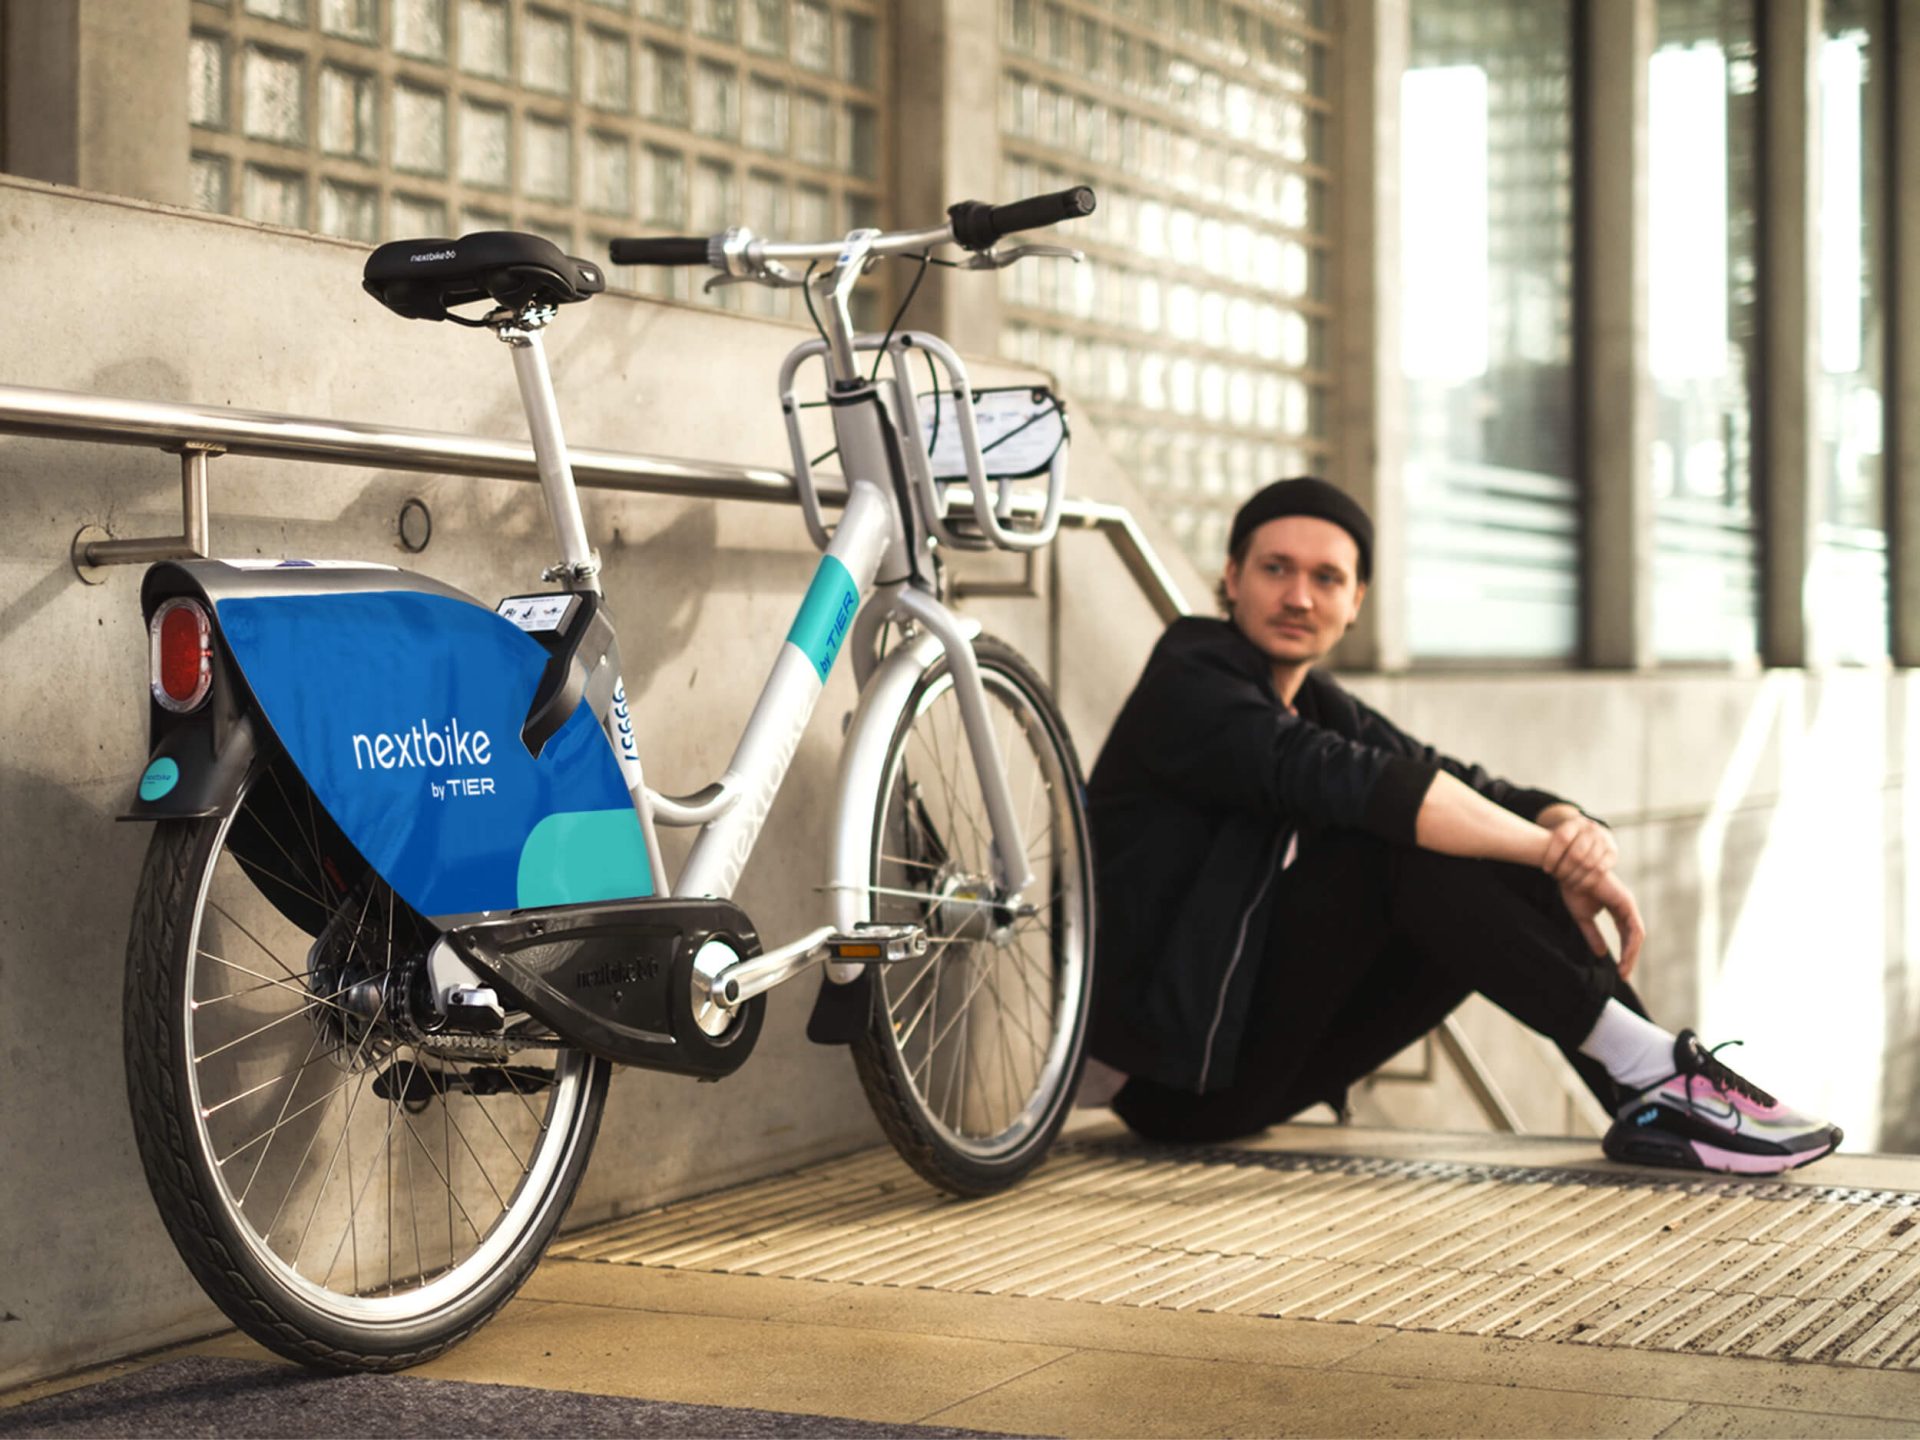 A student sits next to a bike from nextbike